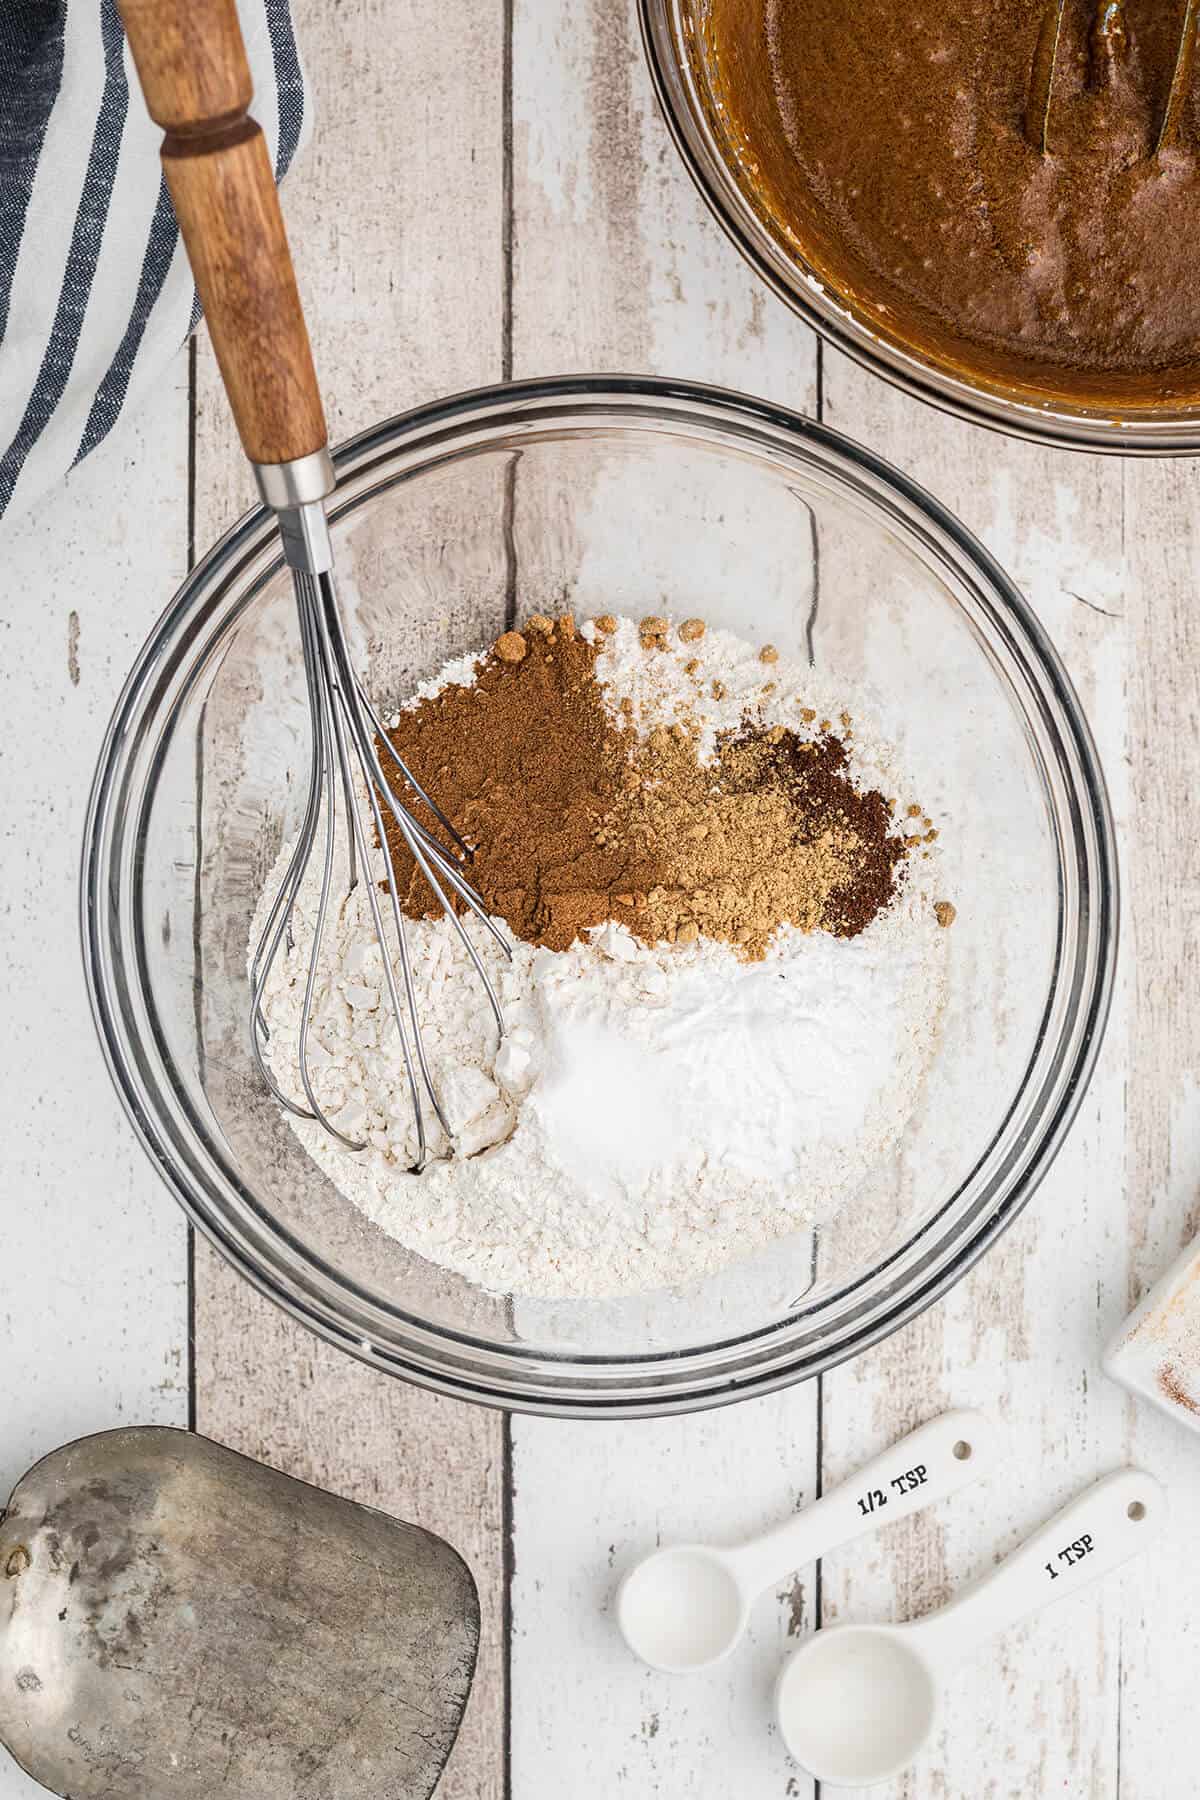 Combining flour and spices in a mixing bowl.